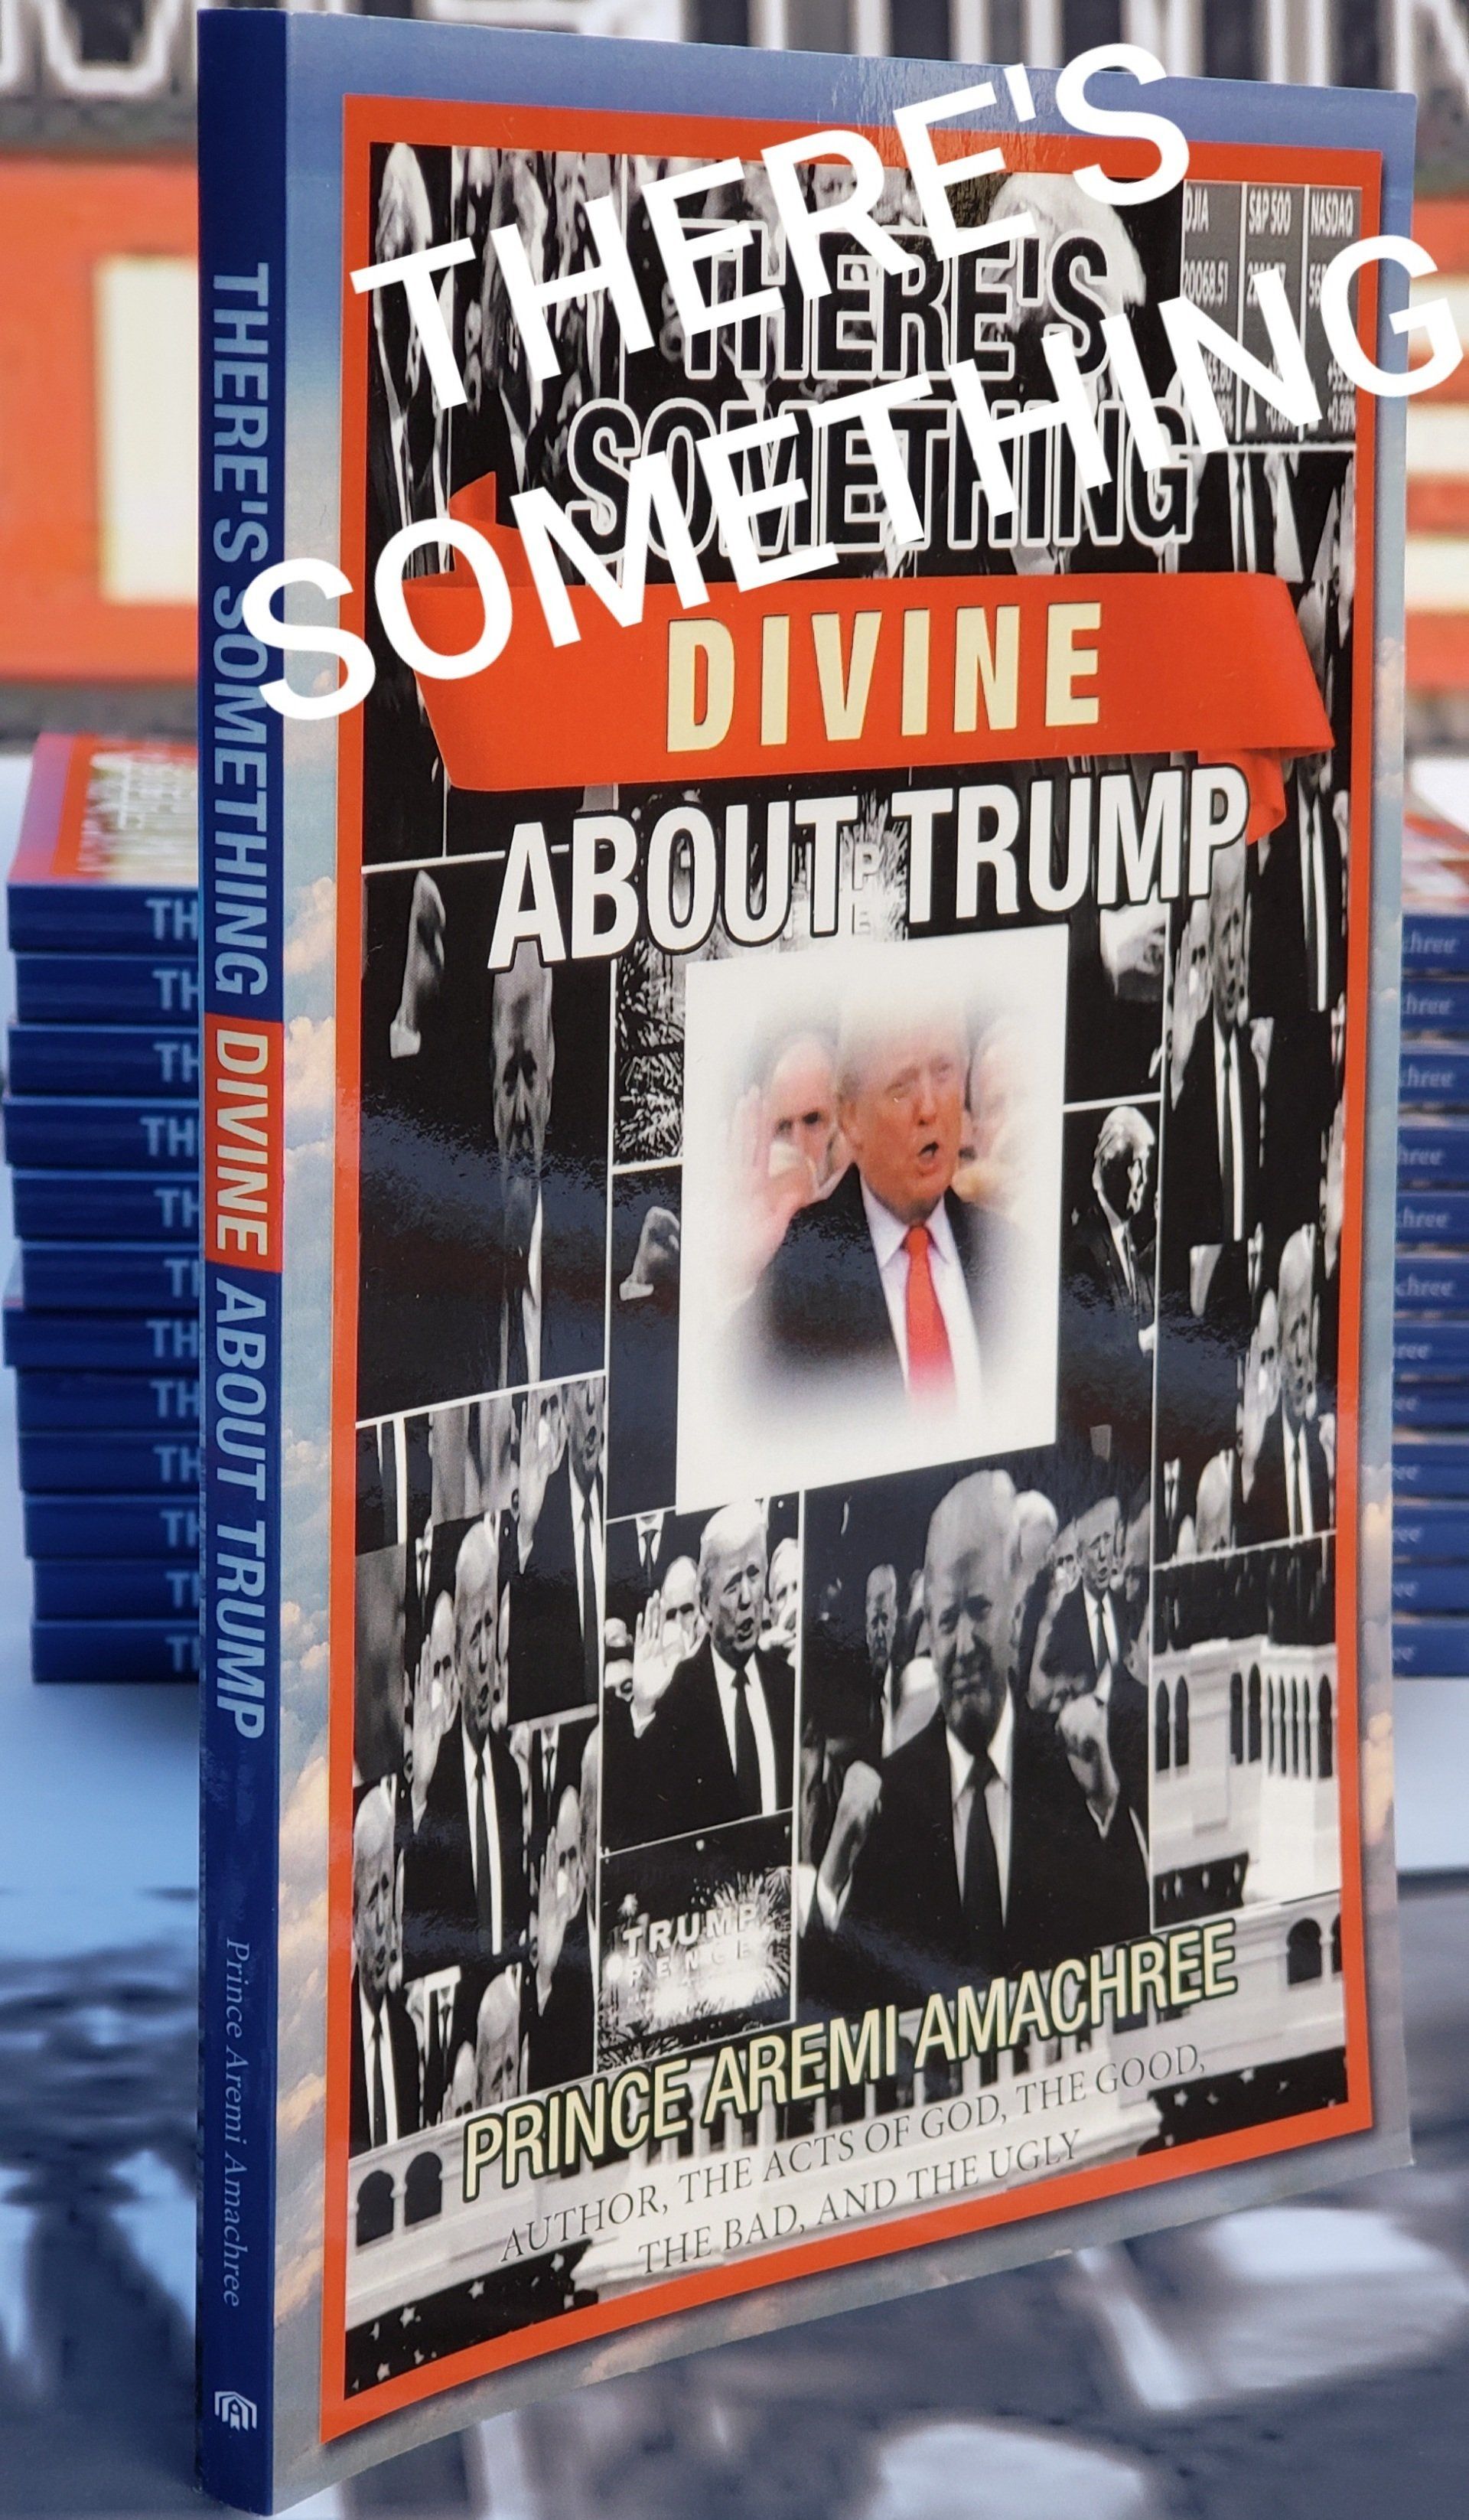 THERE'S SOMETHING DIVINE ABOUT TRUMP